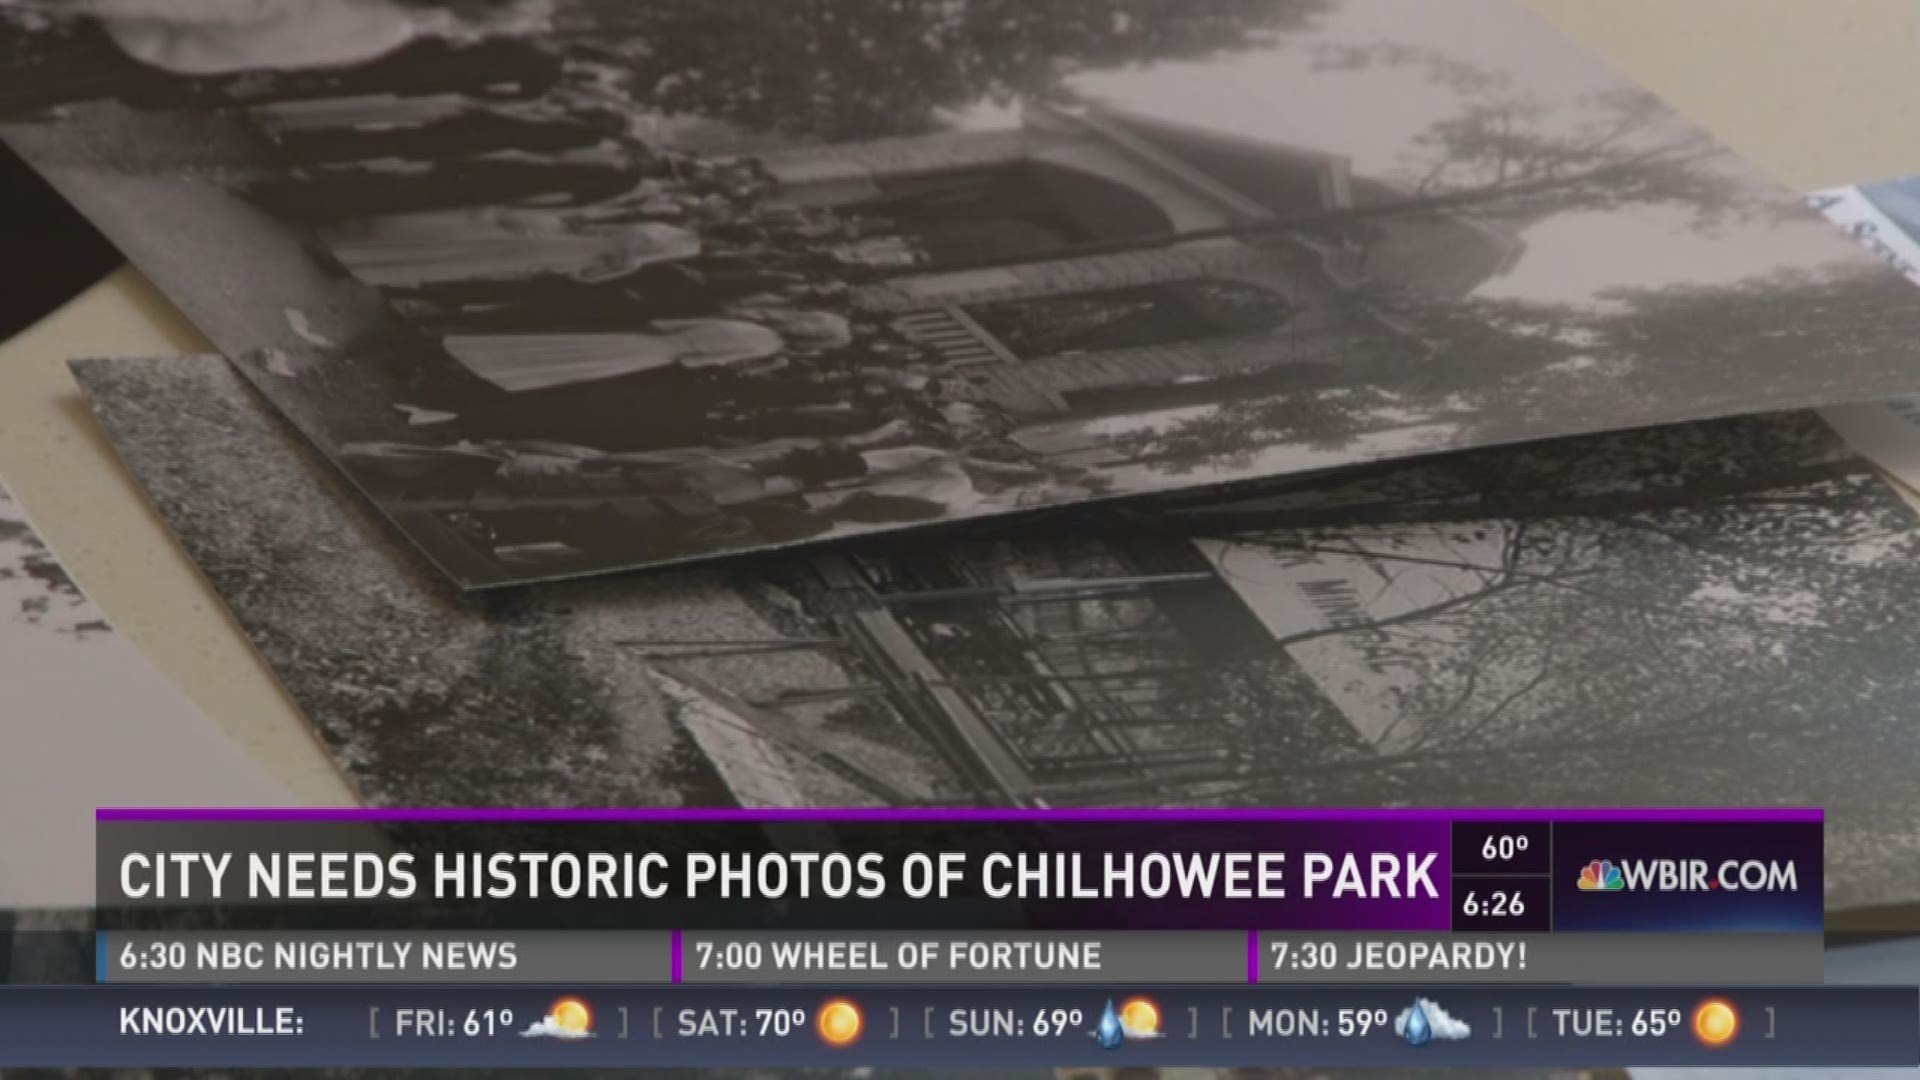 The city of Knoxville wants to see your historic photos of Chilhowee Park. March 24, 2016